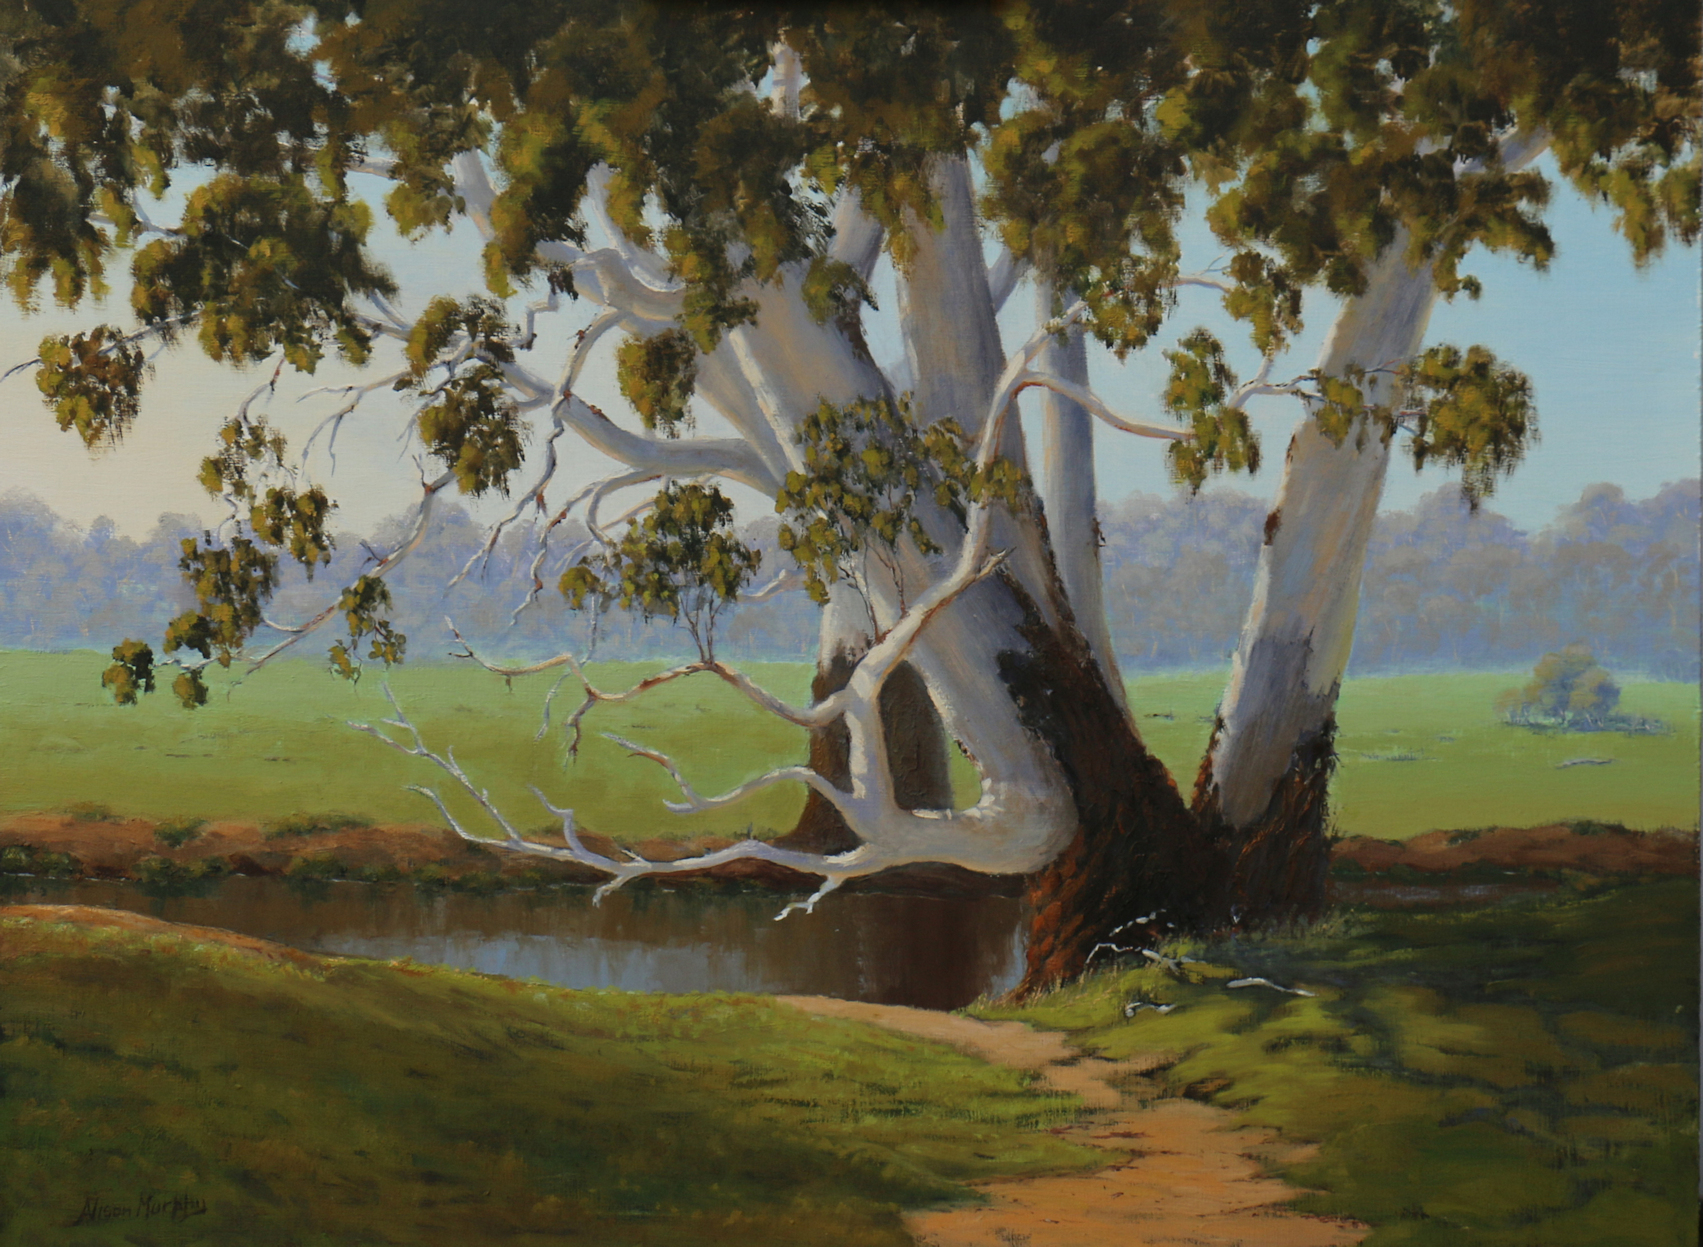 Australian Landscape. Original hand painted artwork. Oil on board. 45x60cm unframed size. To Purchase contact Wide Bay Gallery Queensland Australia. 0741221858.